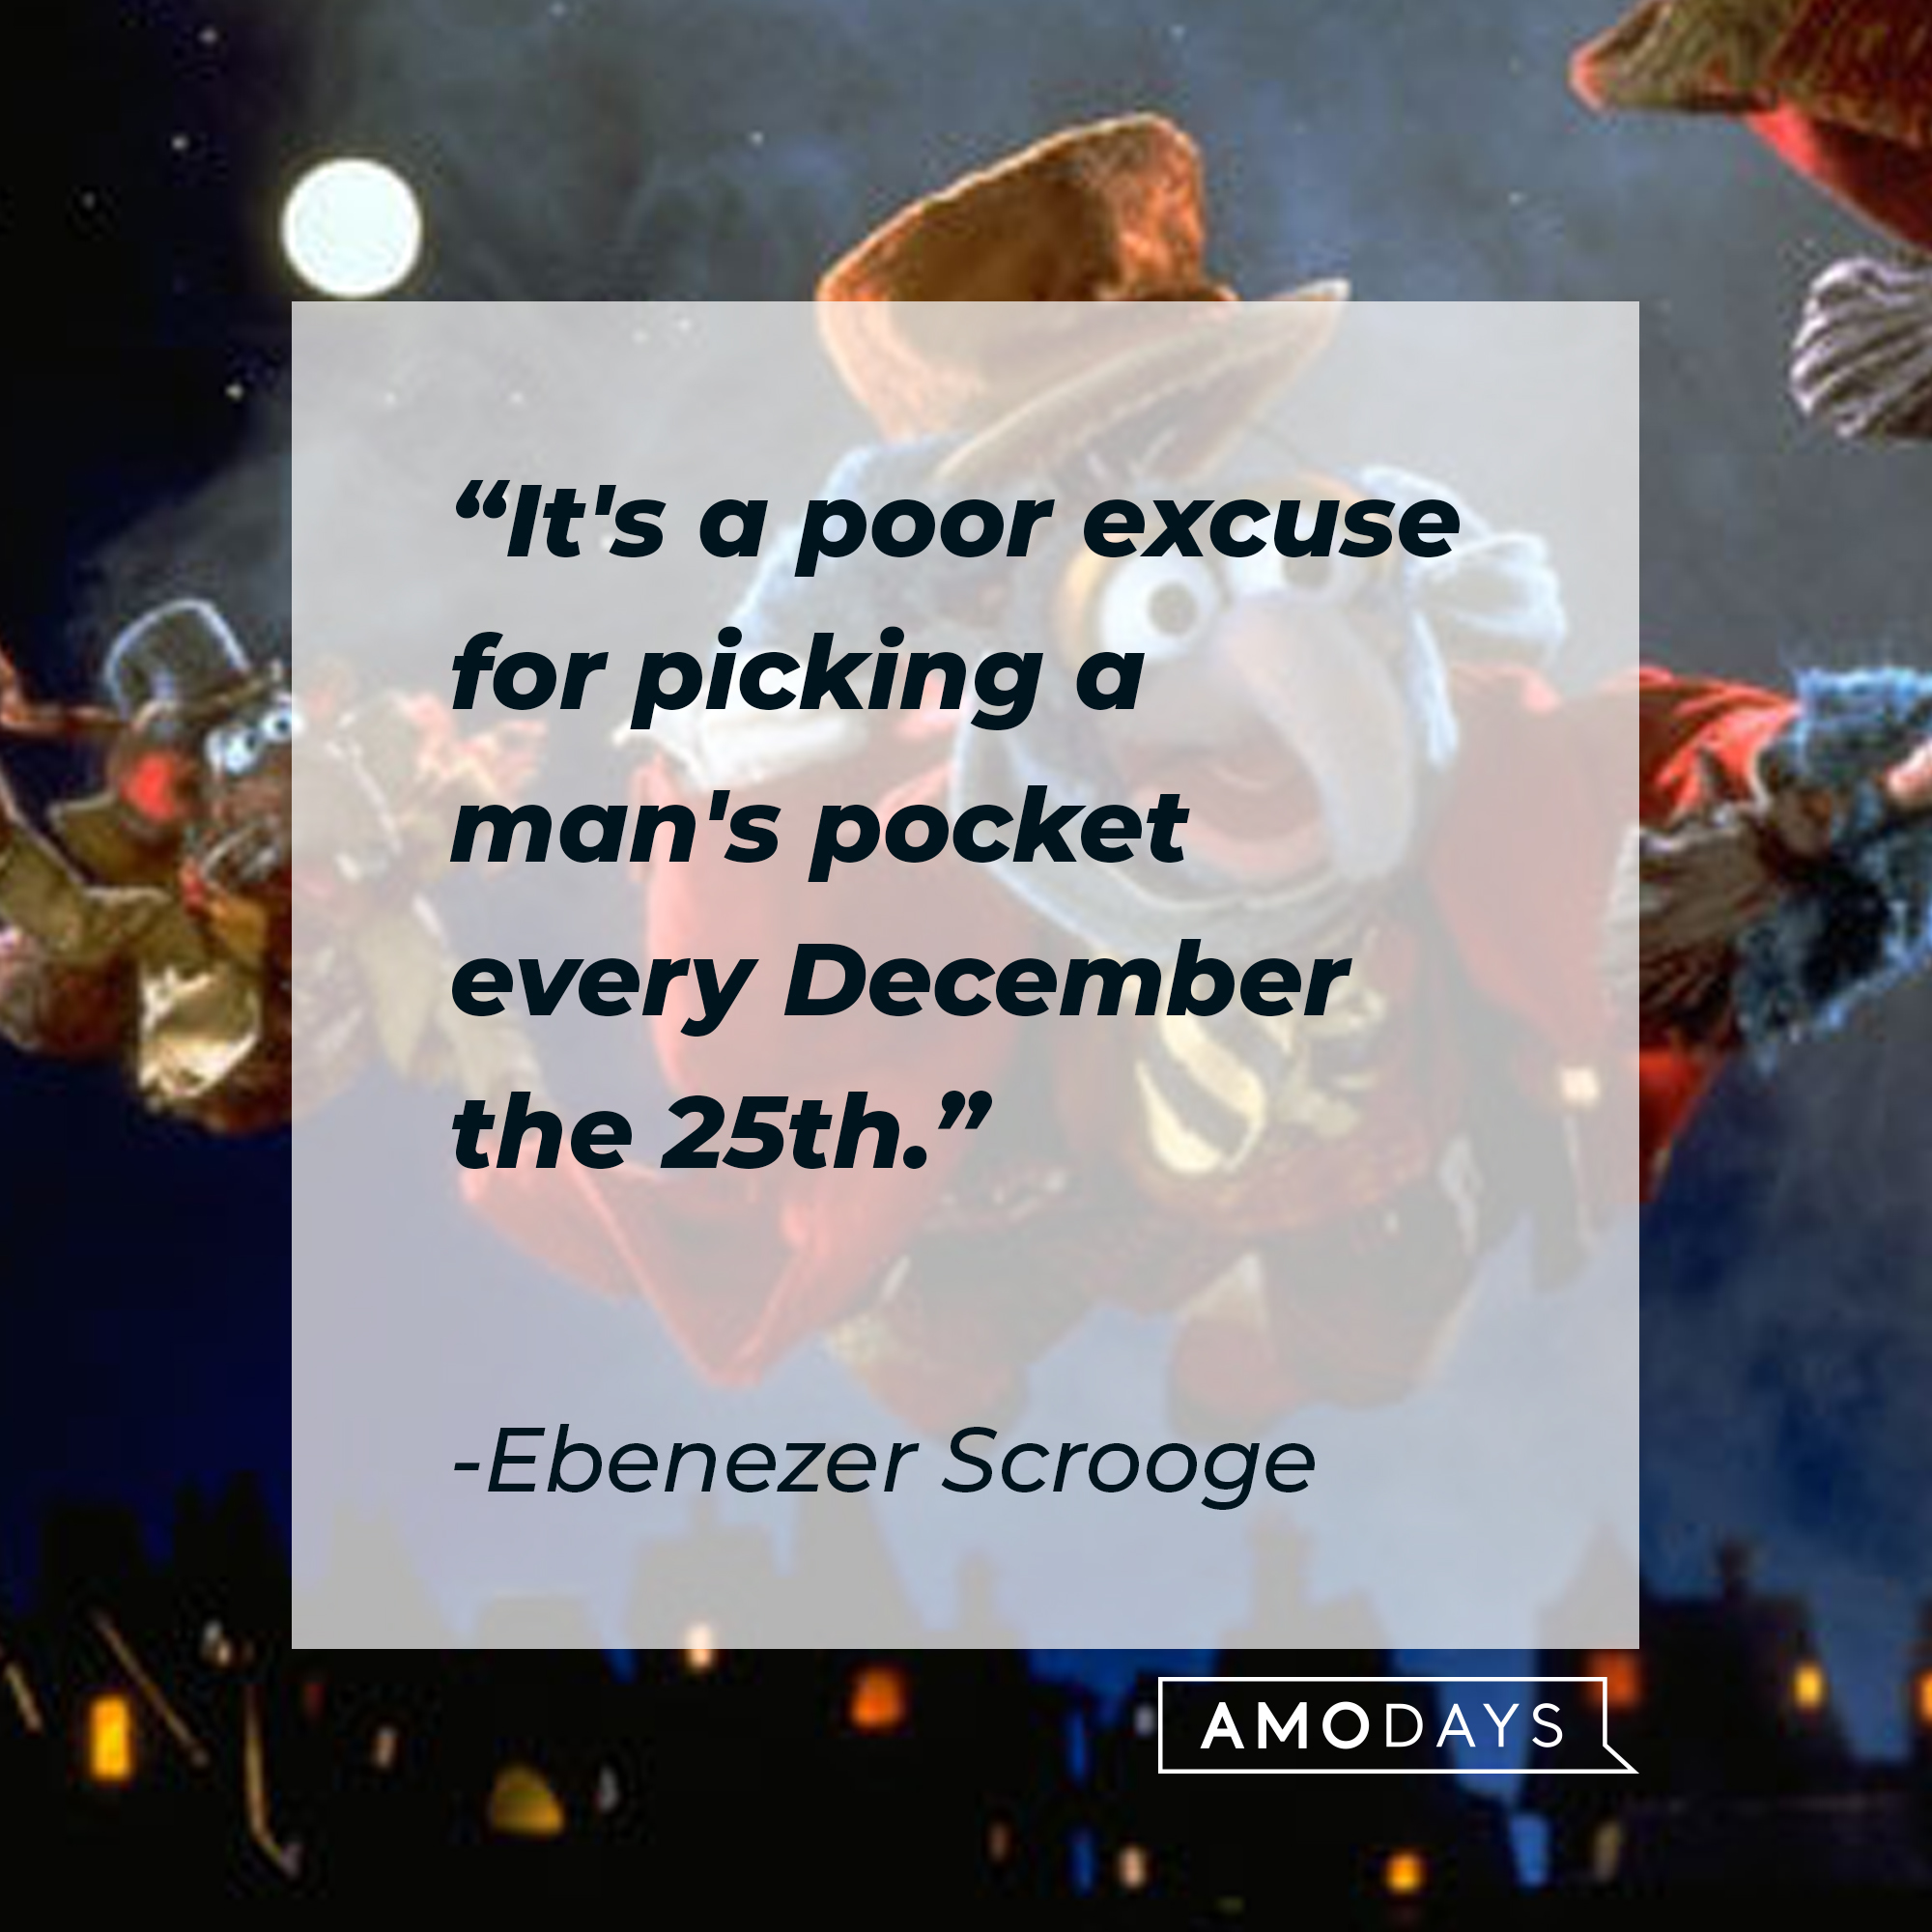 Ebenezer Scrooge's quote: “It's a poor excuse for picking a man's pocket every December the 25th.” | Source: facebook.com/The Muppets Christmas Carol